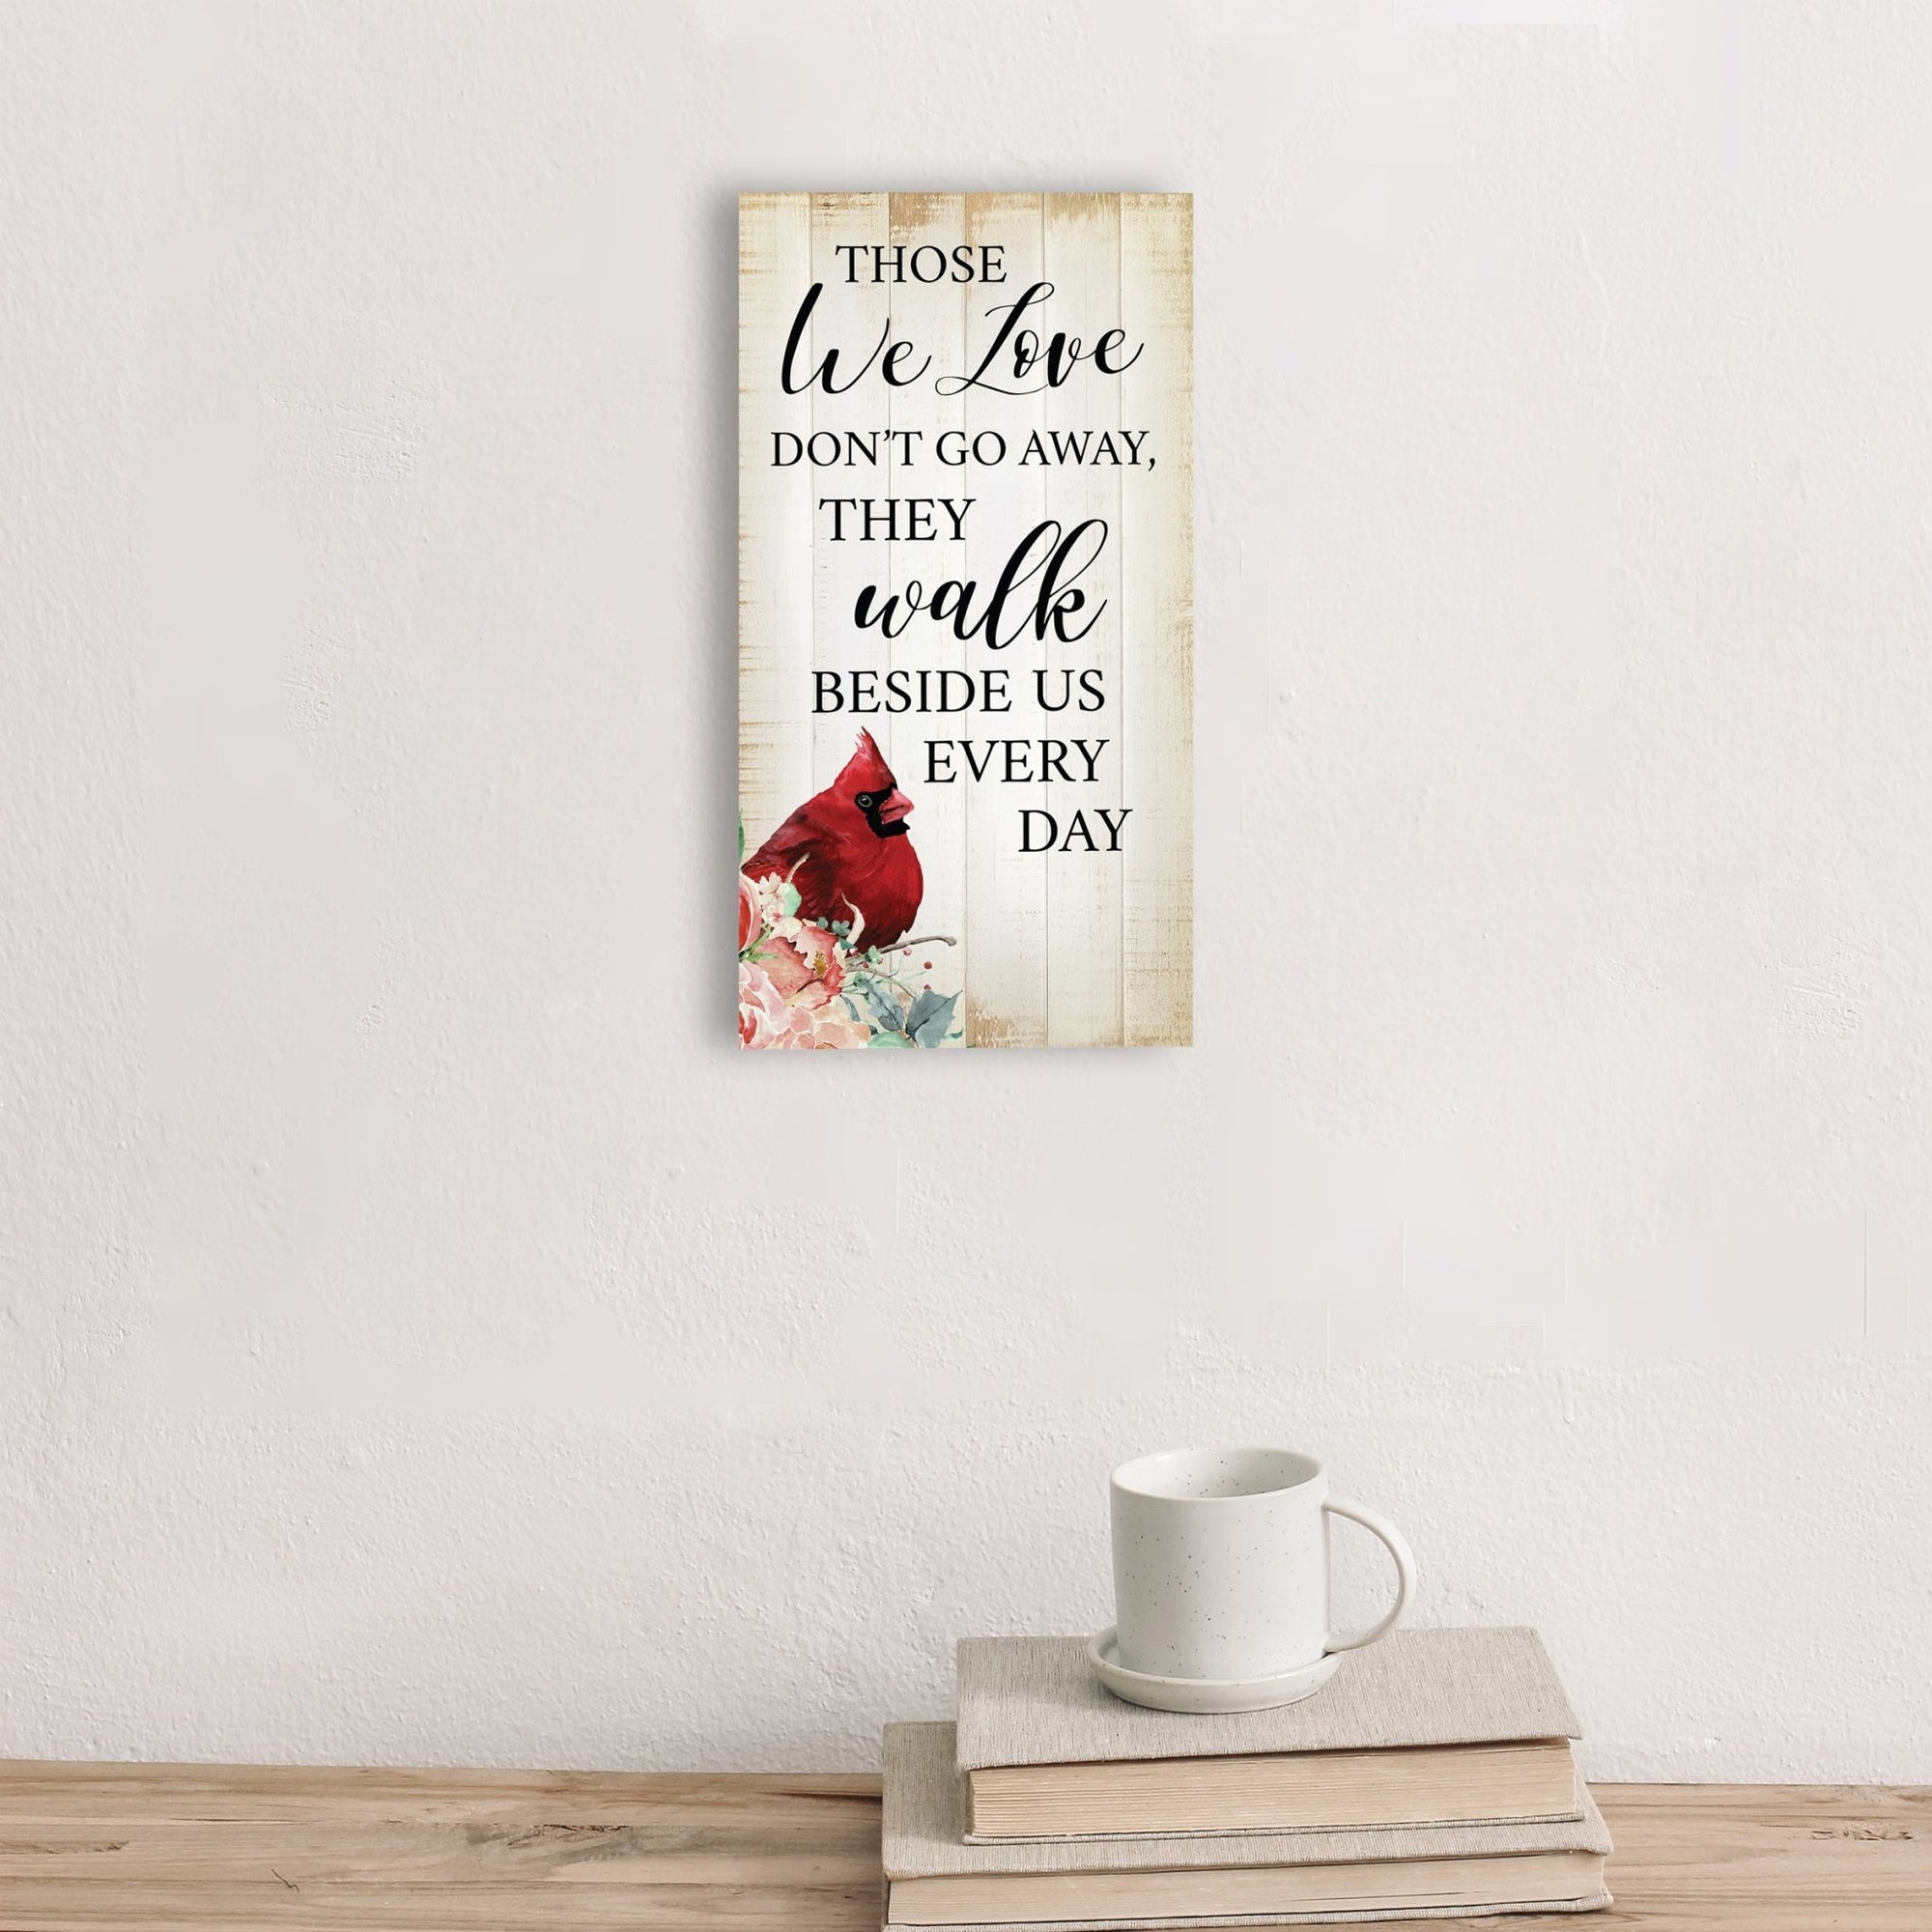 An elegant wooden memorial wall plaque adorned with a cardinal, designed to honor and cherish the memory of your loved one.